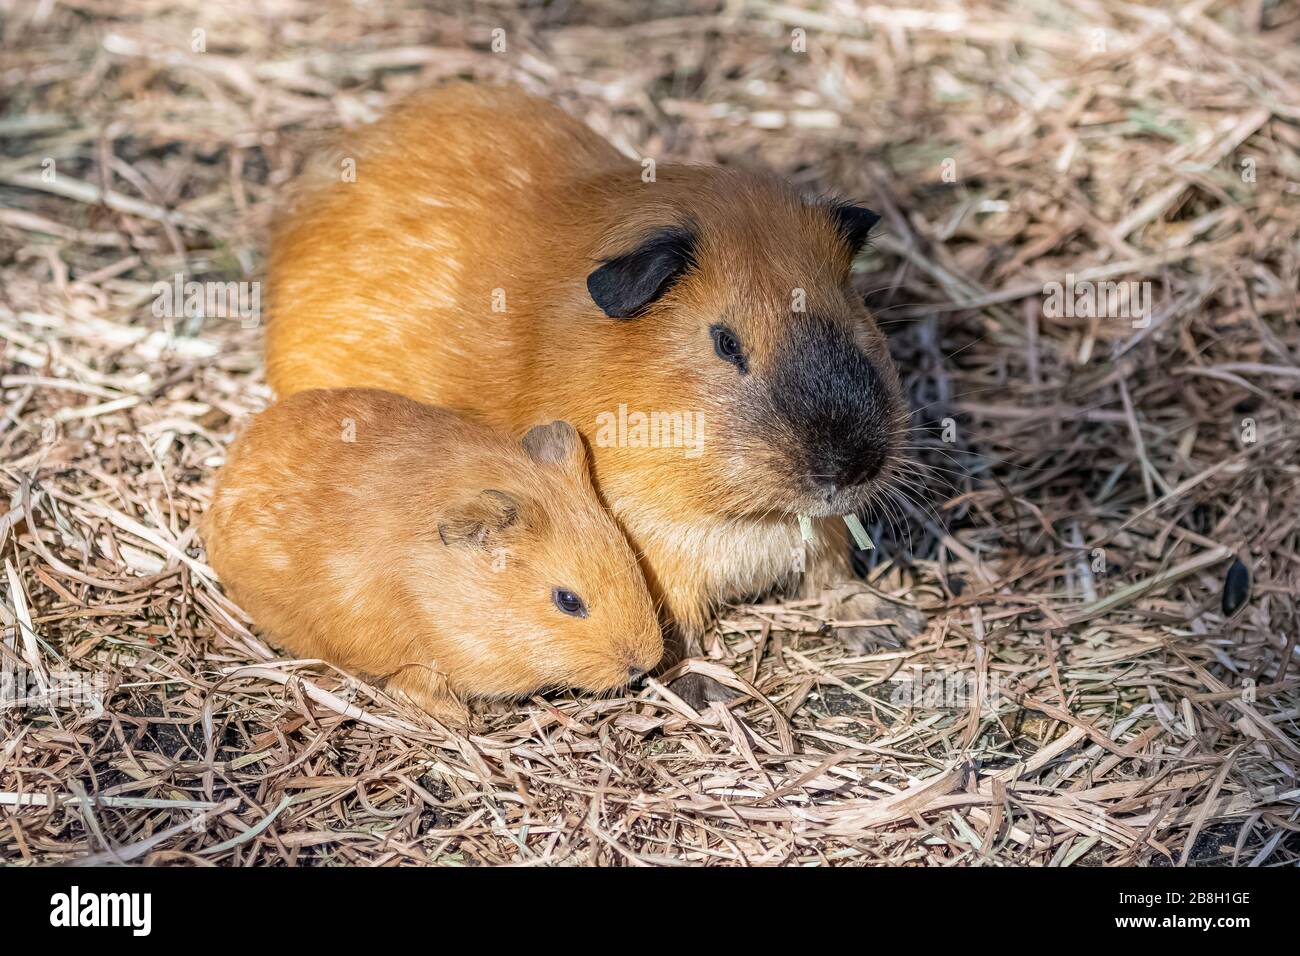 Guinea pigs, cuys, cute animals lying in the hay Stock Photo